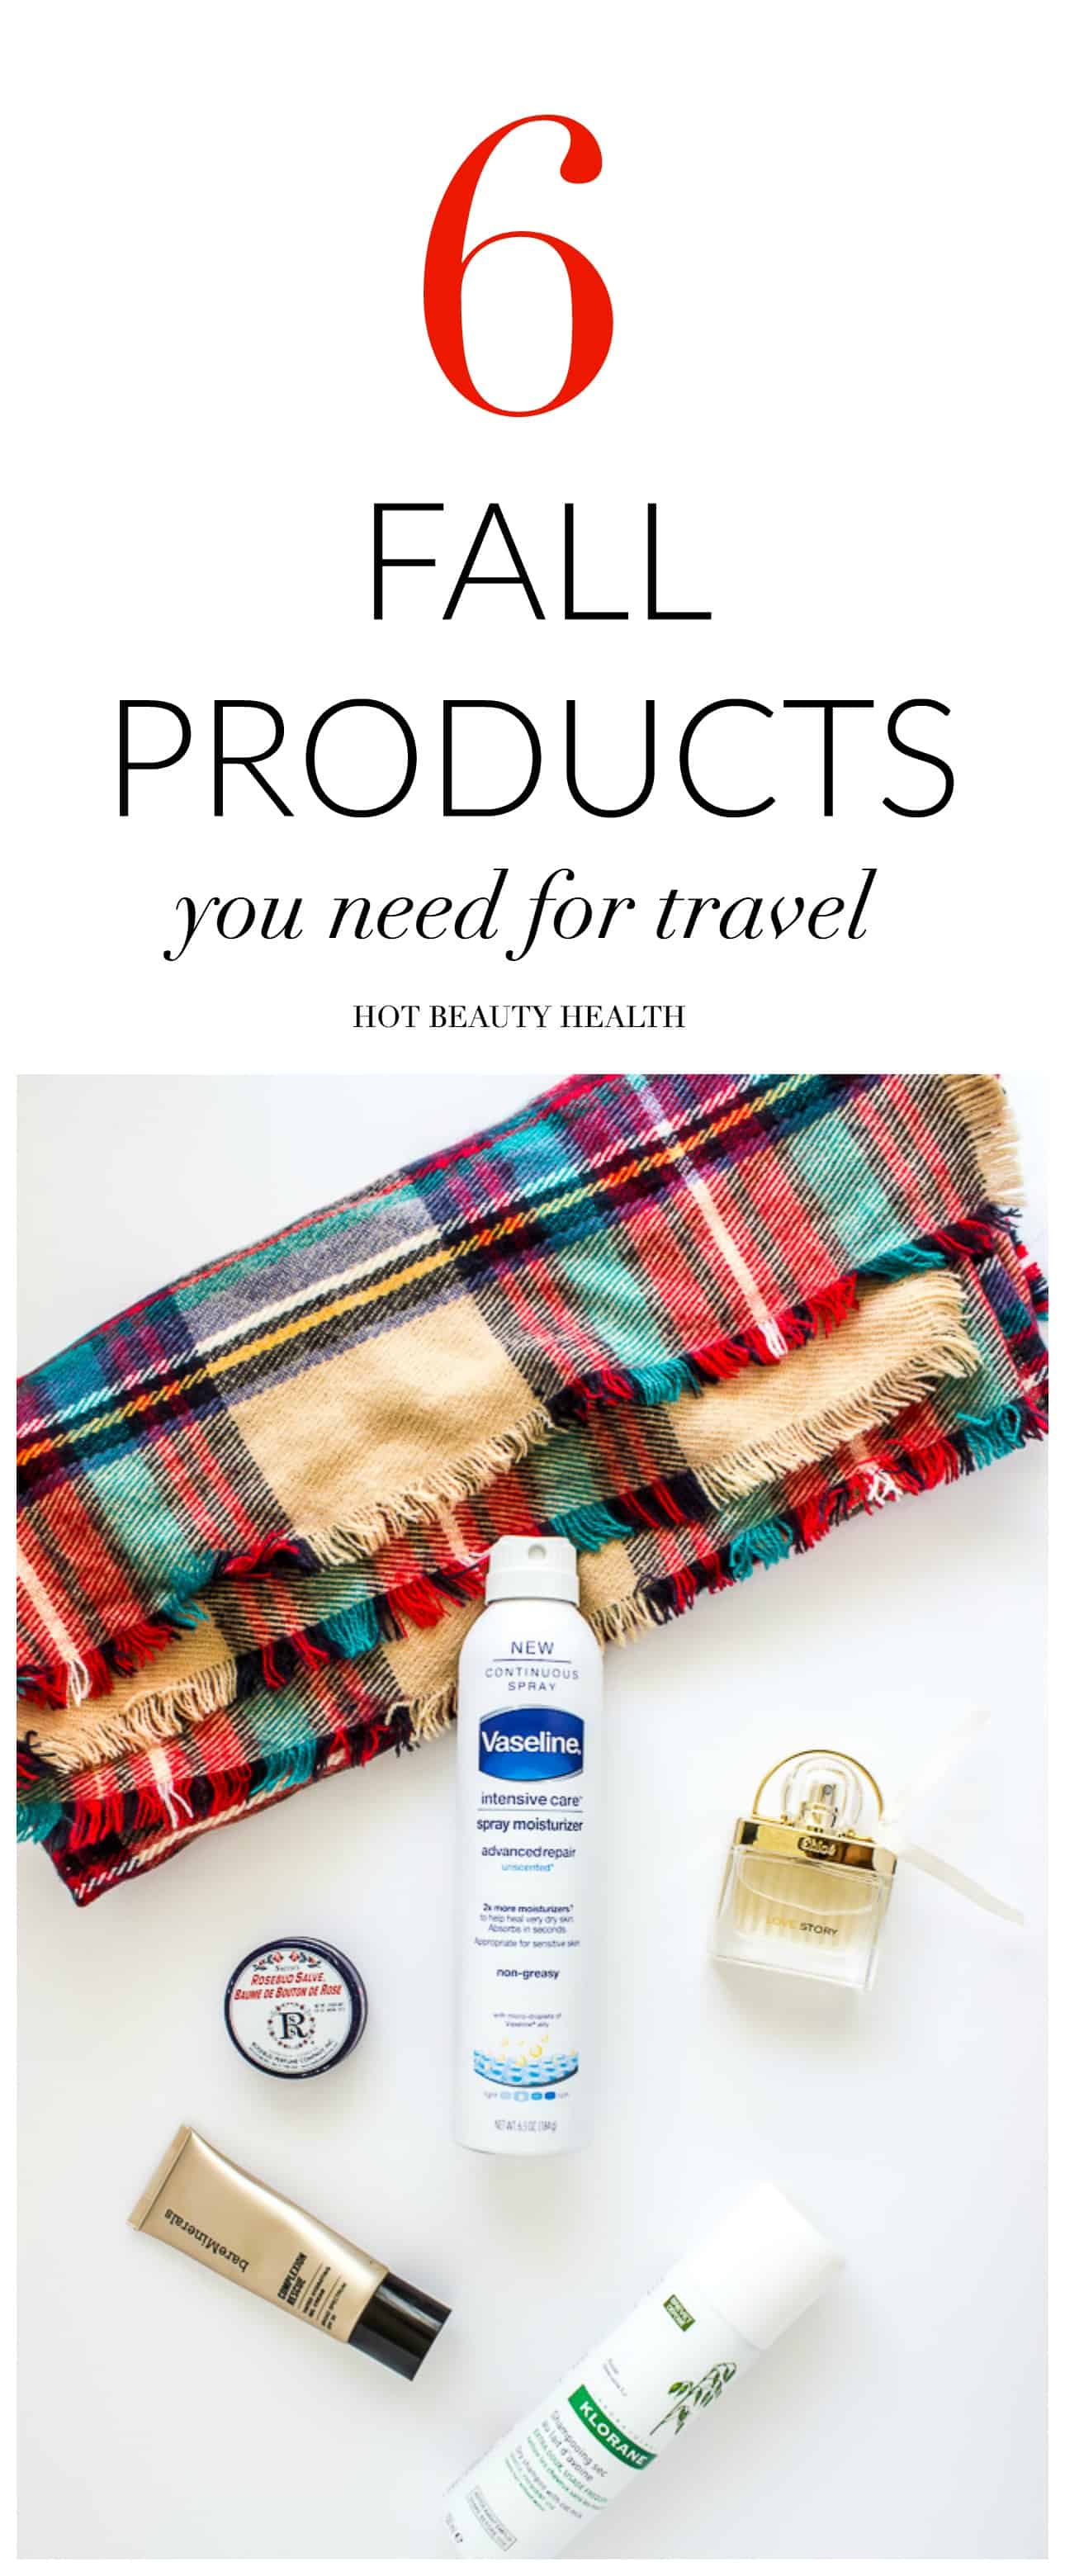 A few of my favorite fall products that I love to use when I travel. Pack these items in your suitcase!